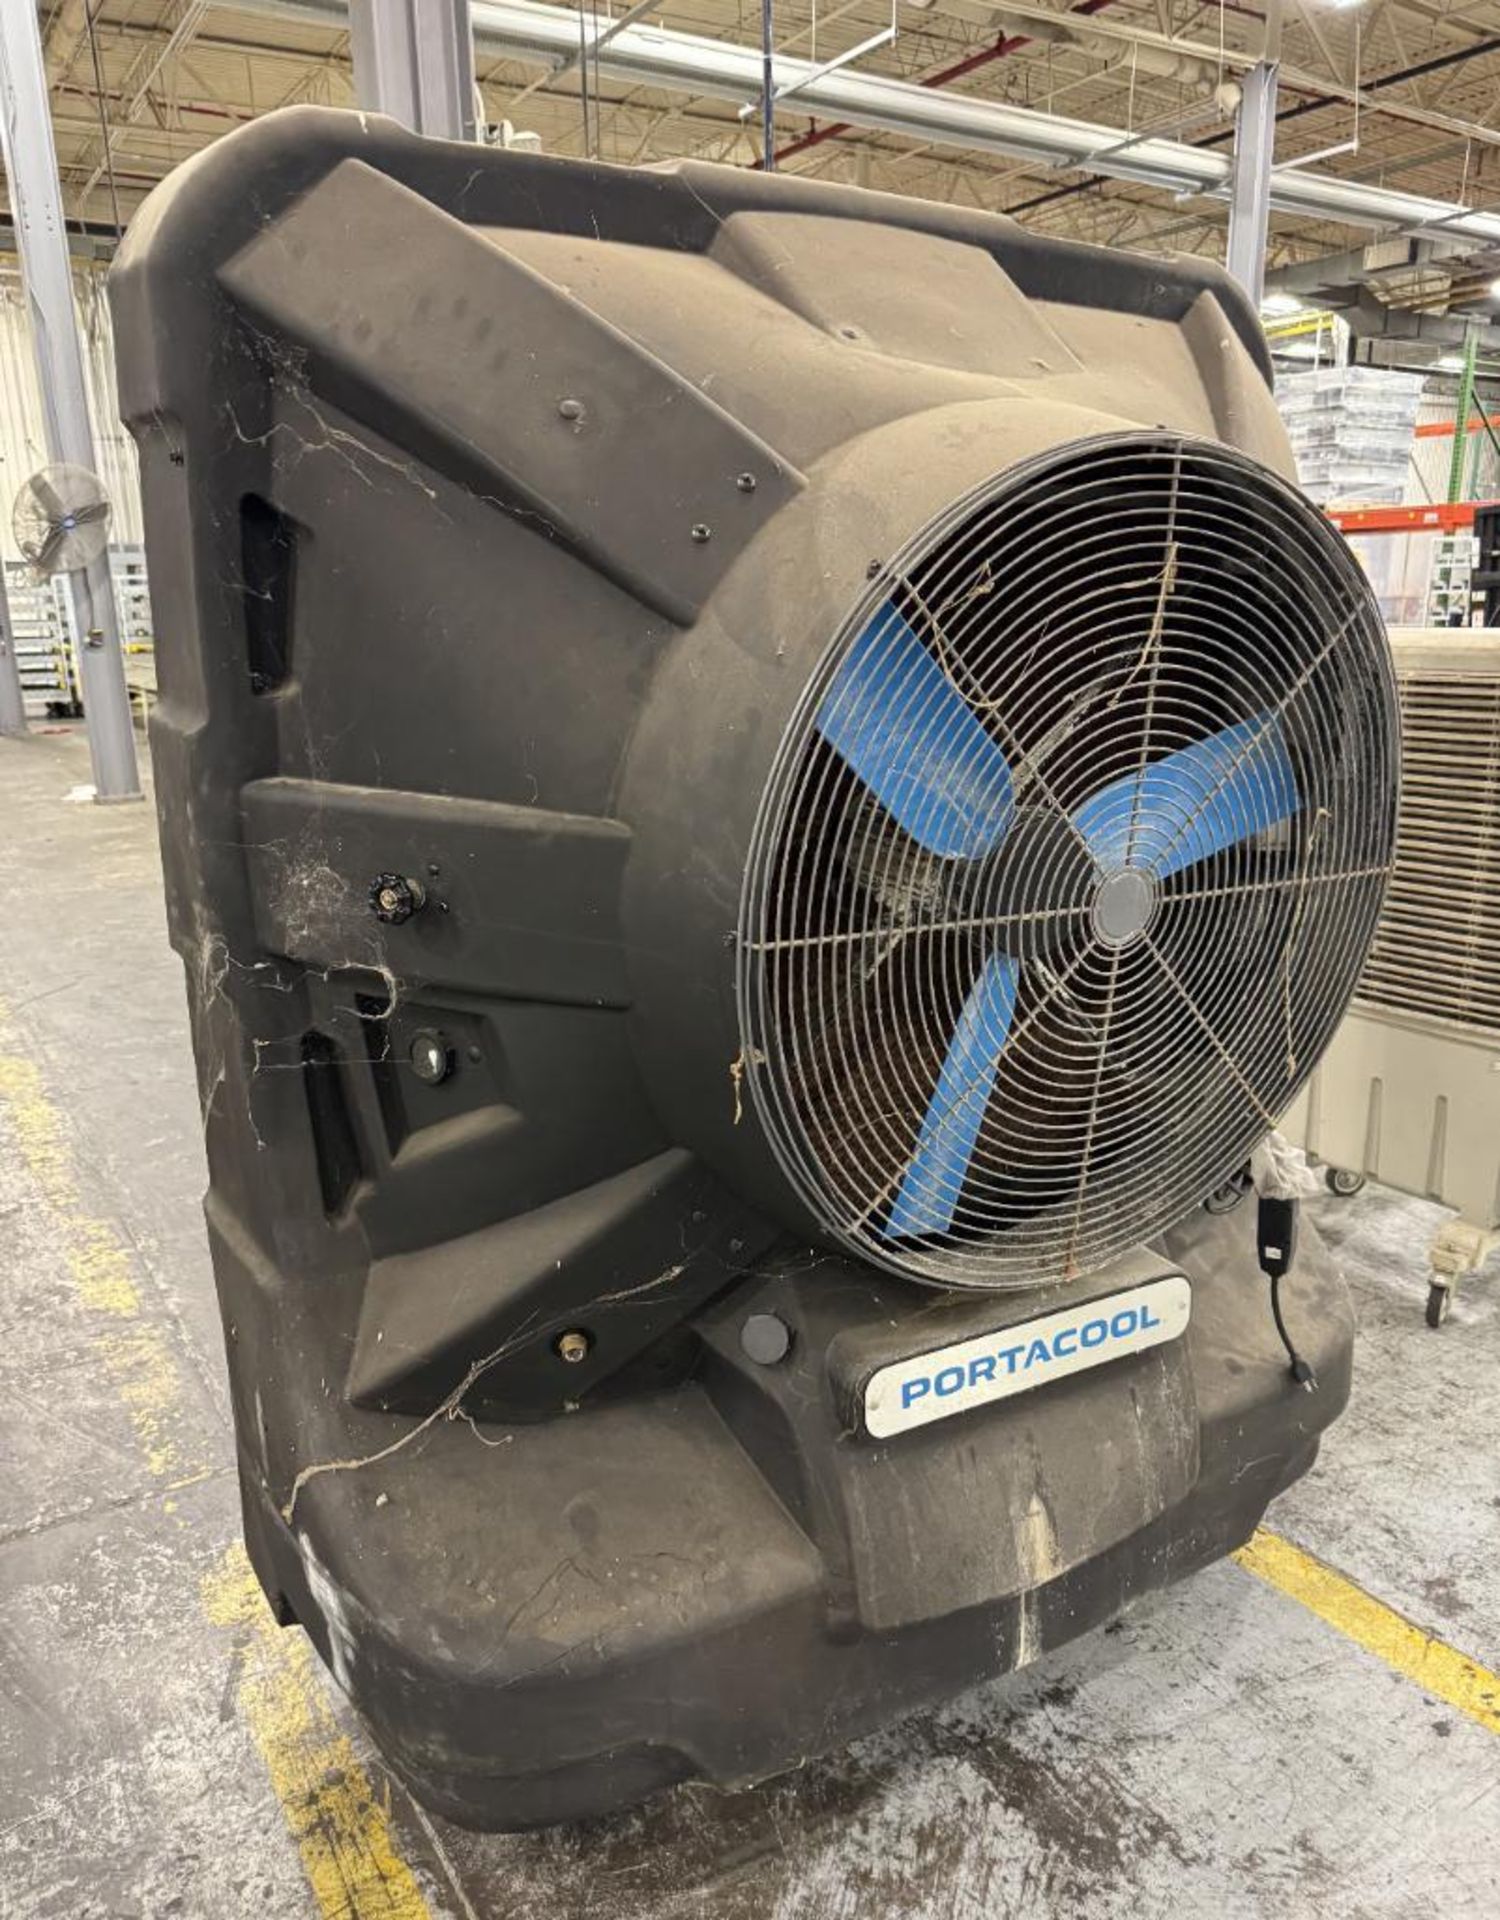 Lot Of (2) Cooling Fans. With (1) Portacool Jetstream 260, (1) Global Industrial. - Image 4 of 8